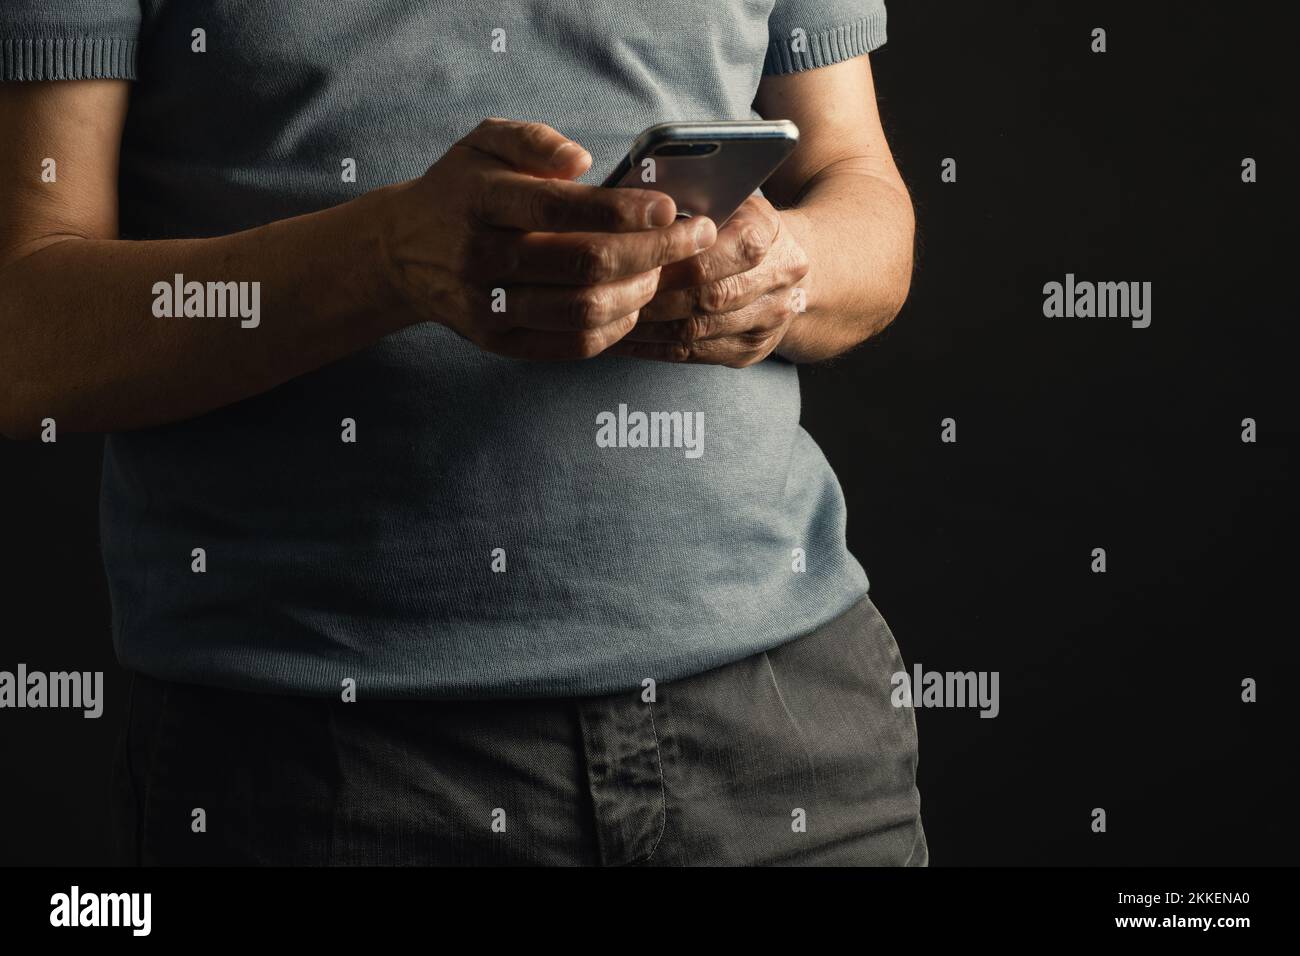 Cropped front view of a man wearing jeans and short-sleeved shirt using smartphone, indoor environment with black backdrop. Male hands with cell phone Stock Photo